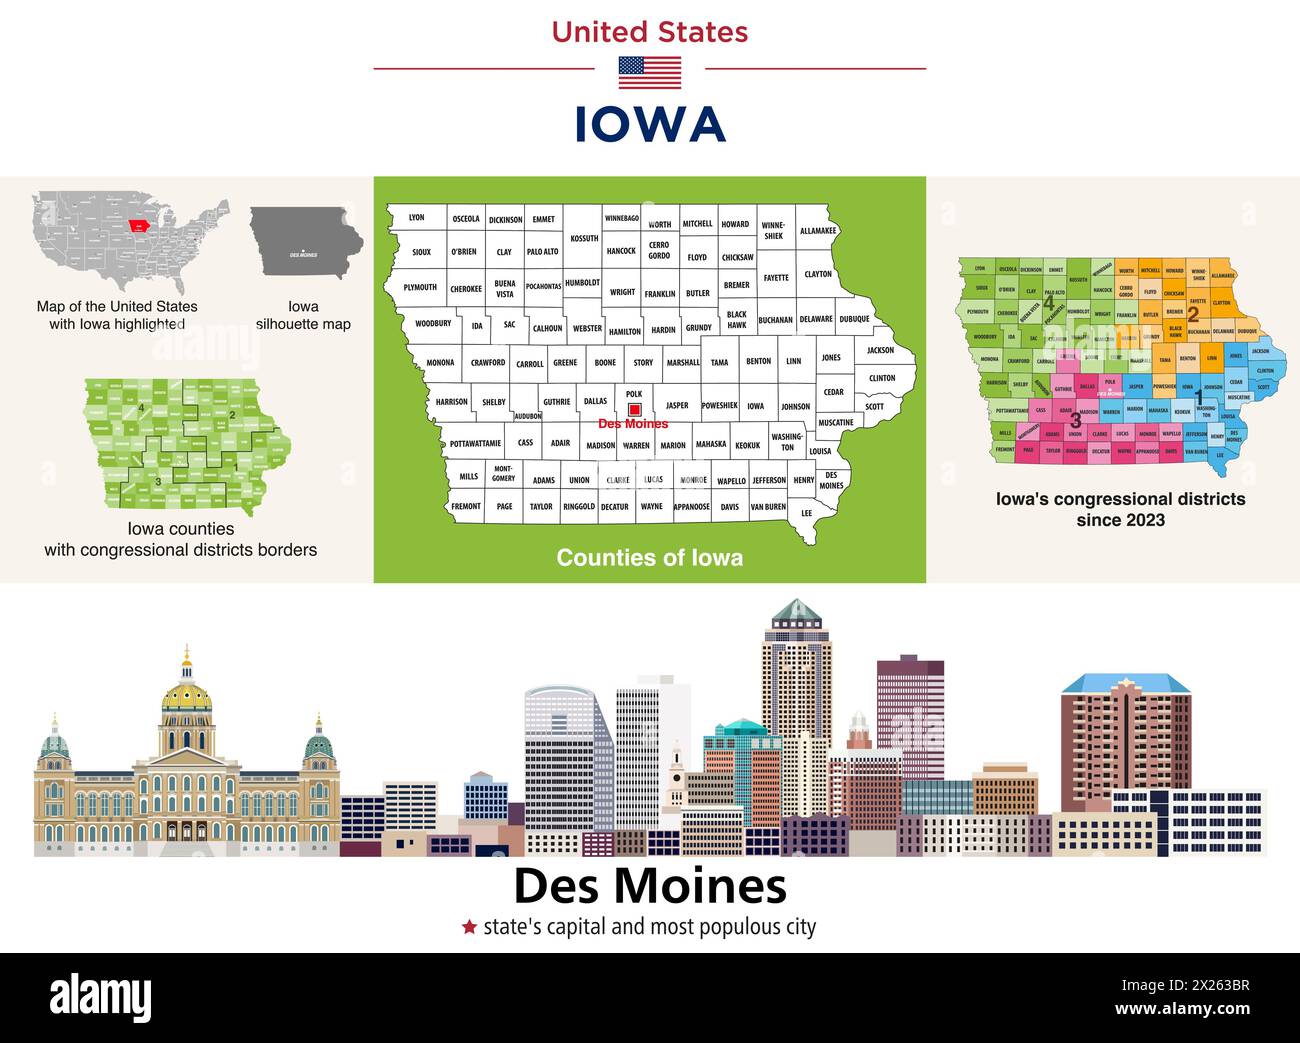 Iowa's counties map and congressional districts since 2023 map. Des Moines skyline (state's capital and most populous city). Vector set Stock Vector